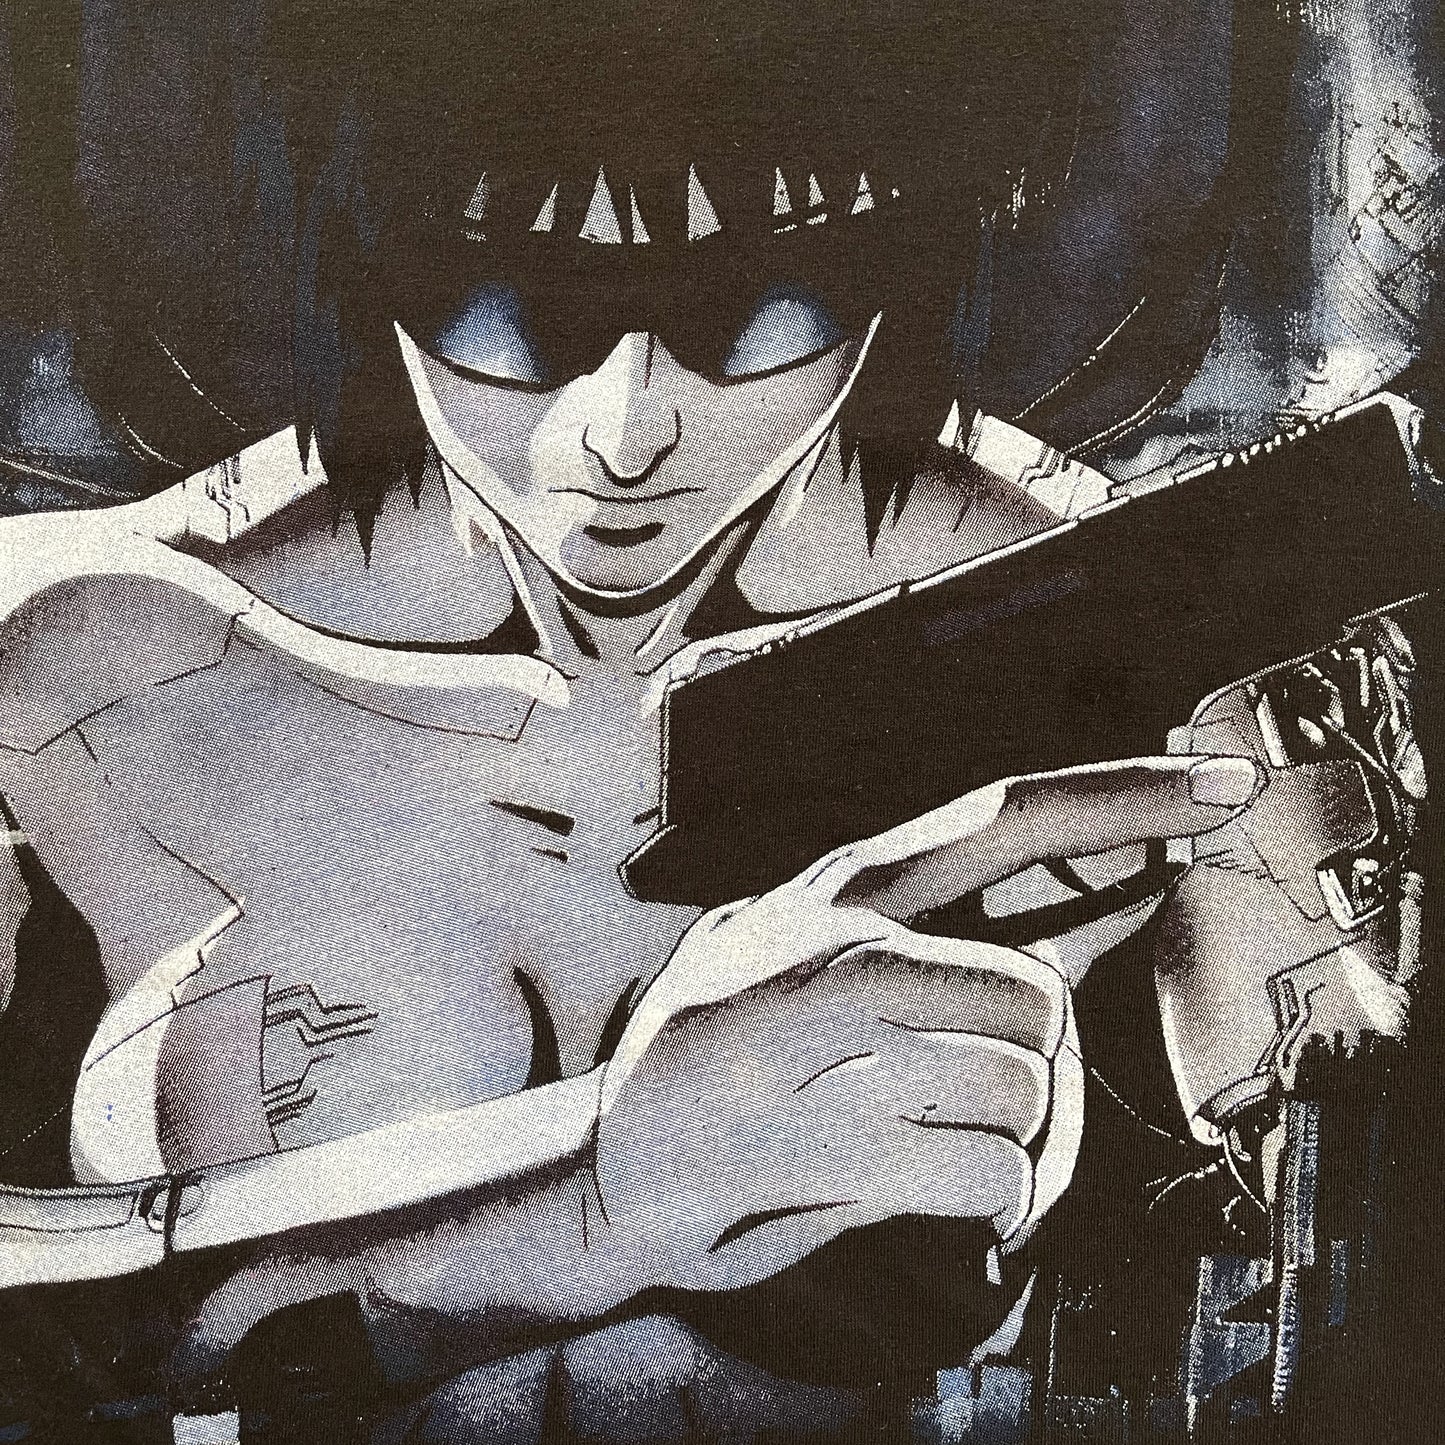 Ghost In The Shell T-Shirt 